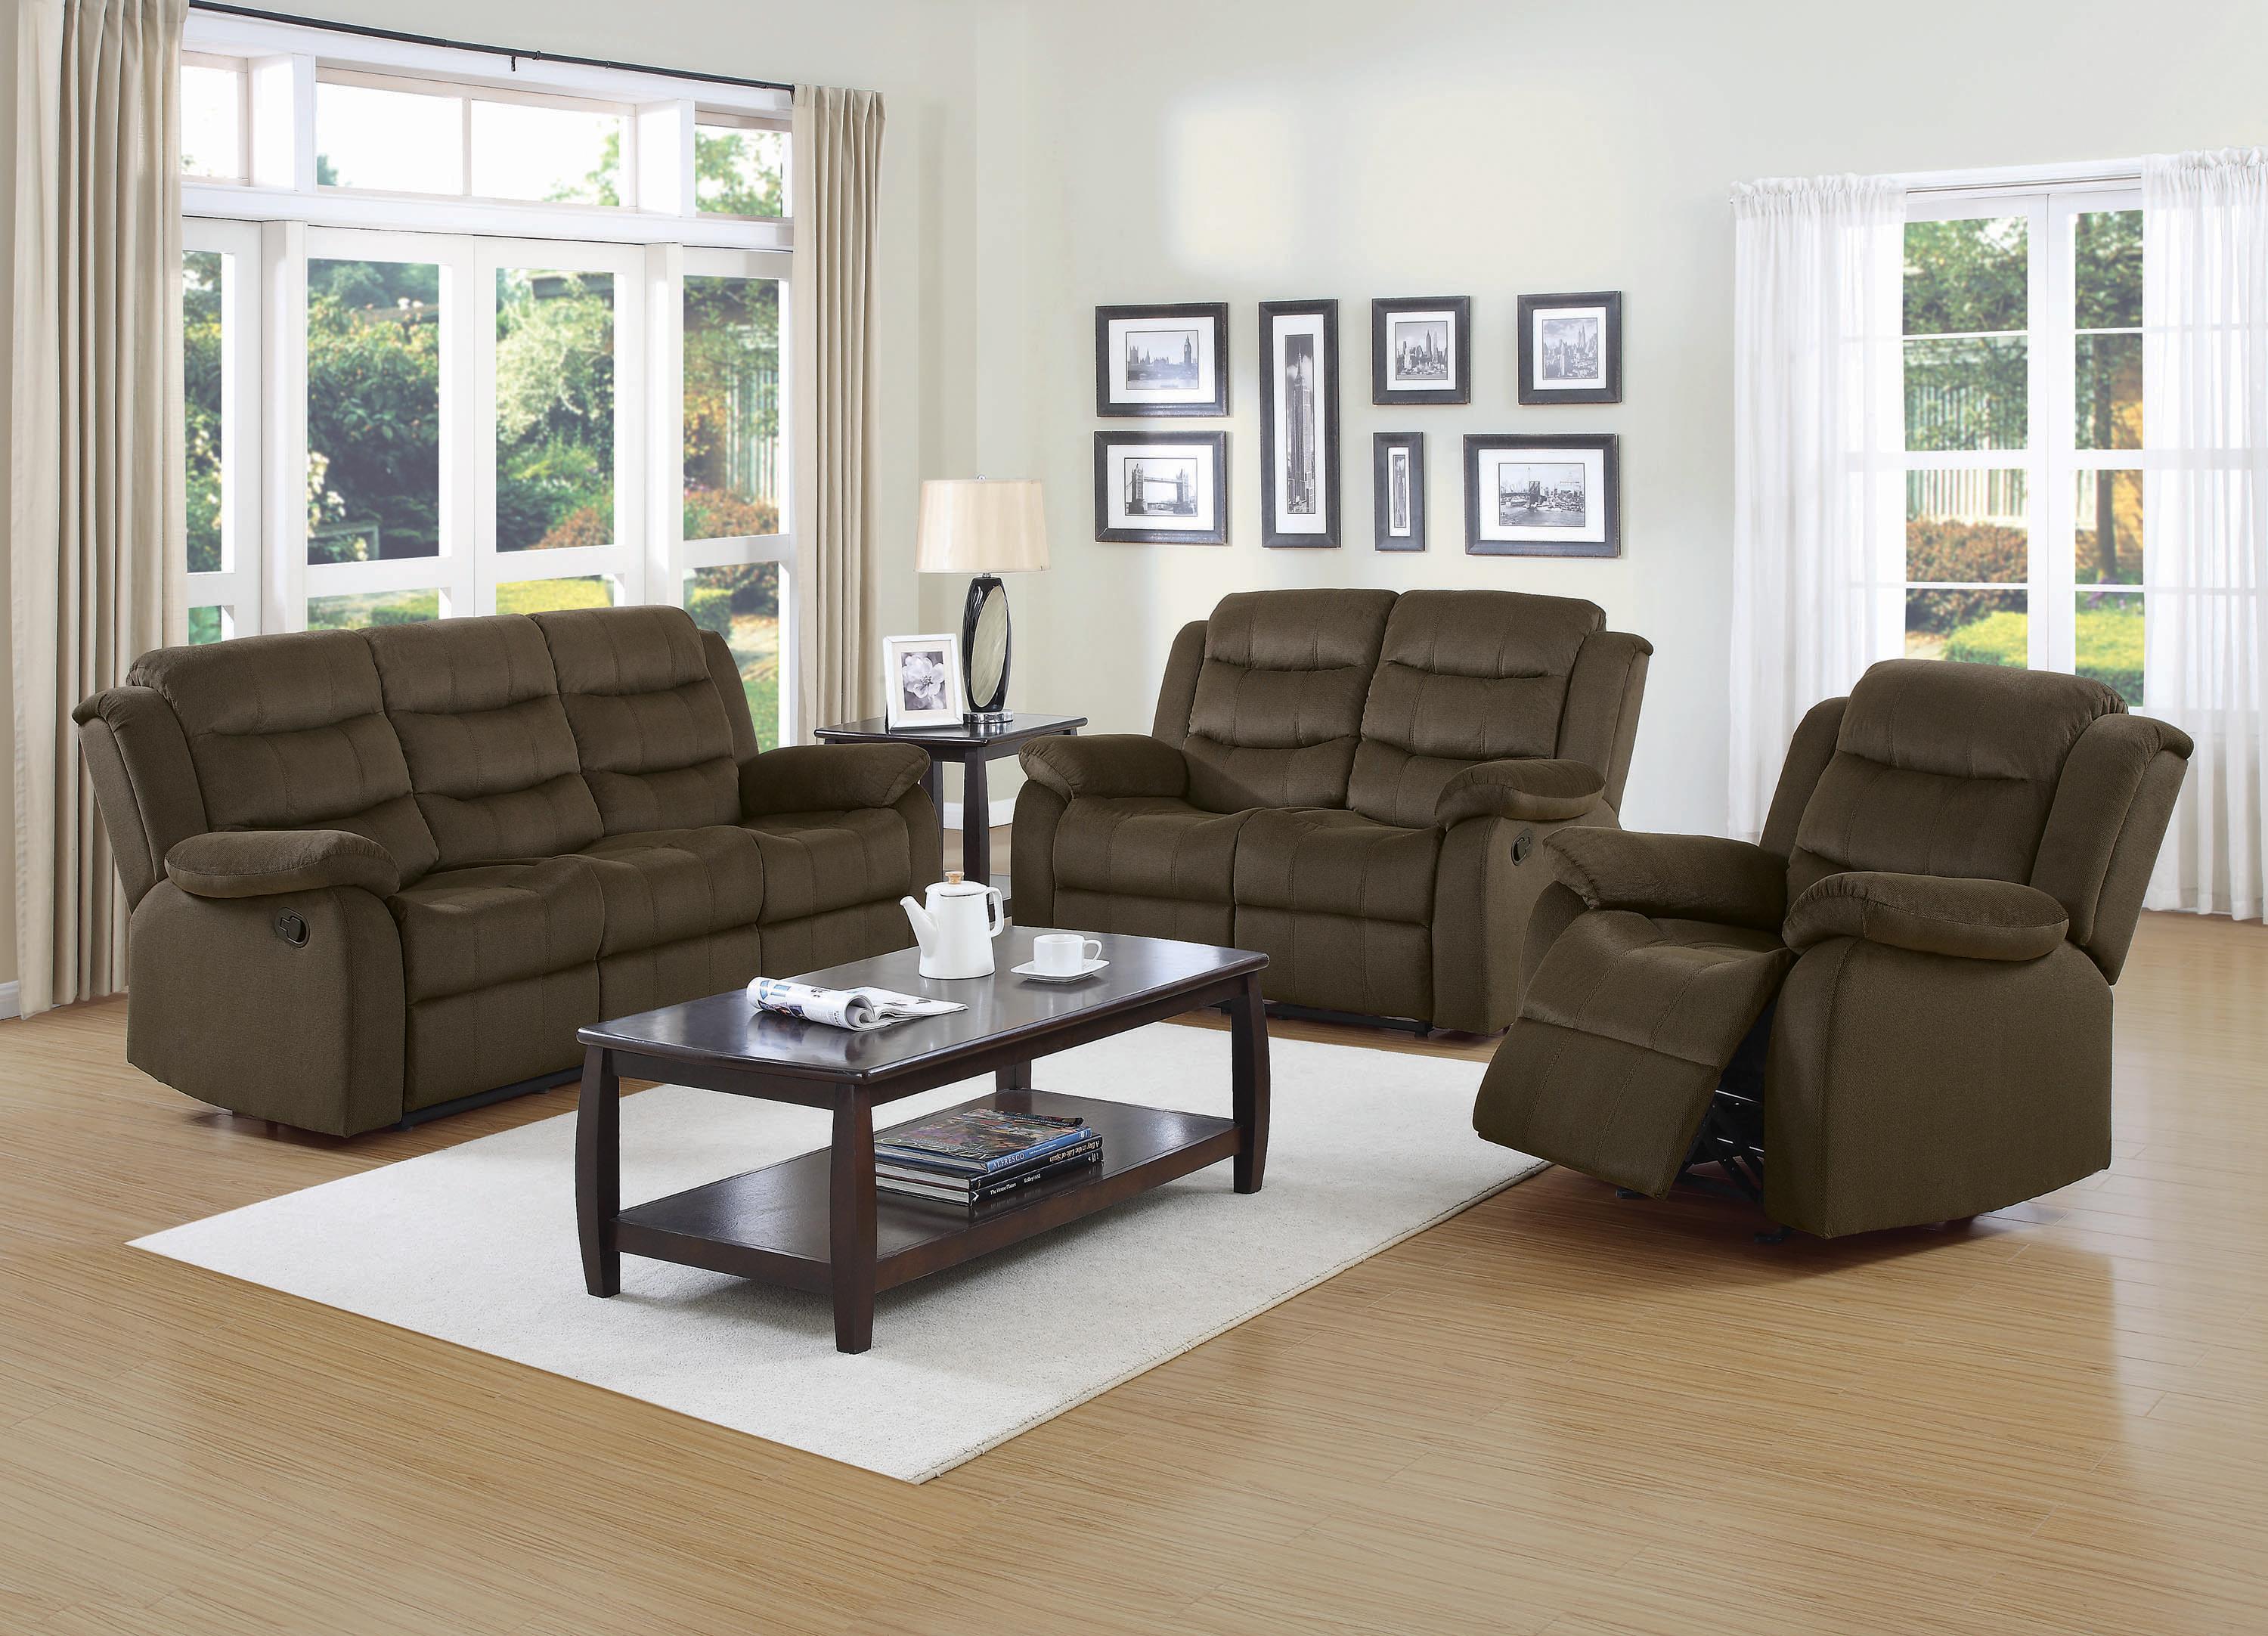 Transitional Living Room Set 601881-S2 Rodman 601881-S2 in Brown 